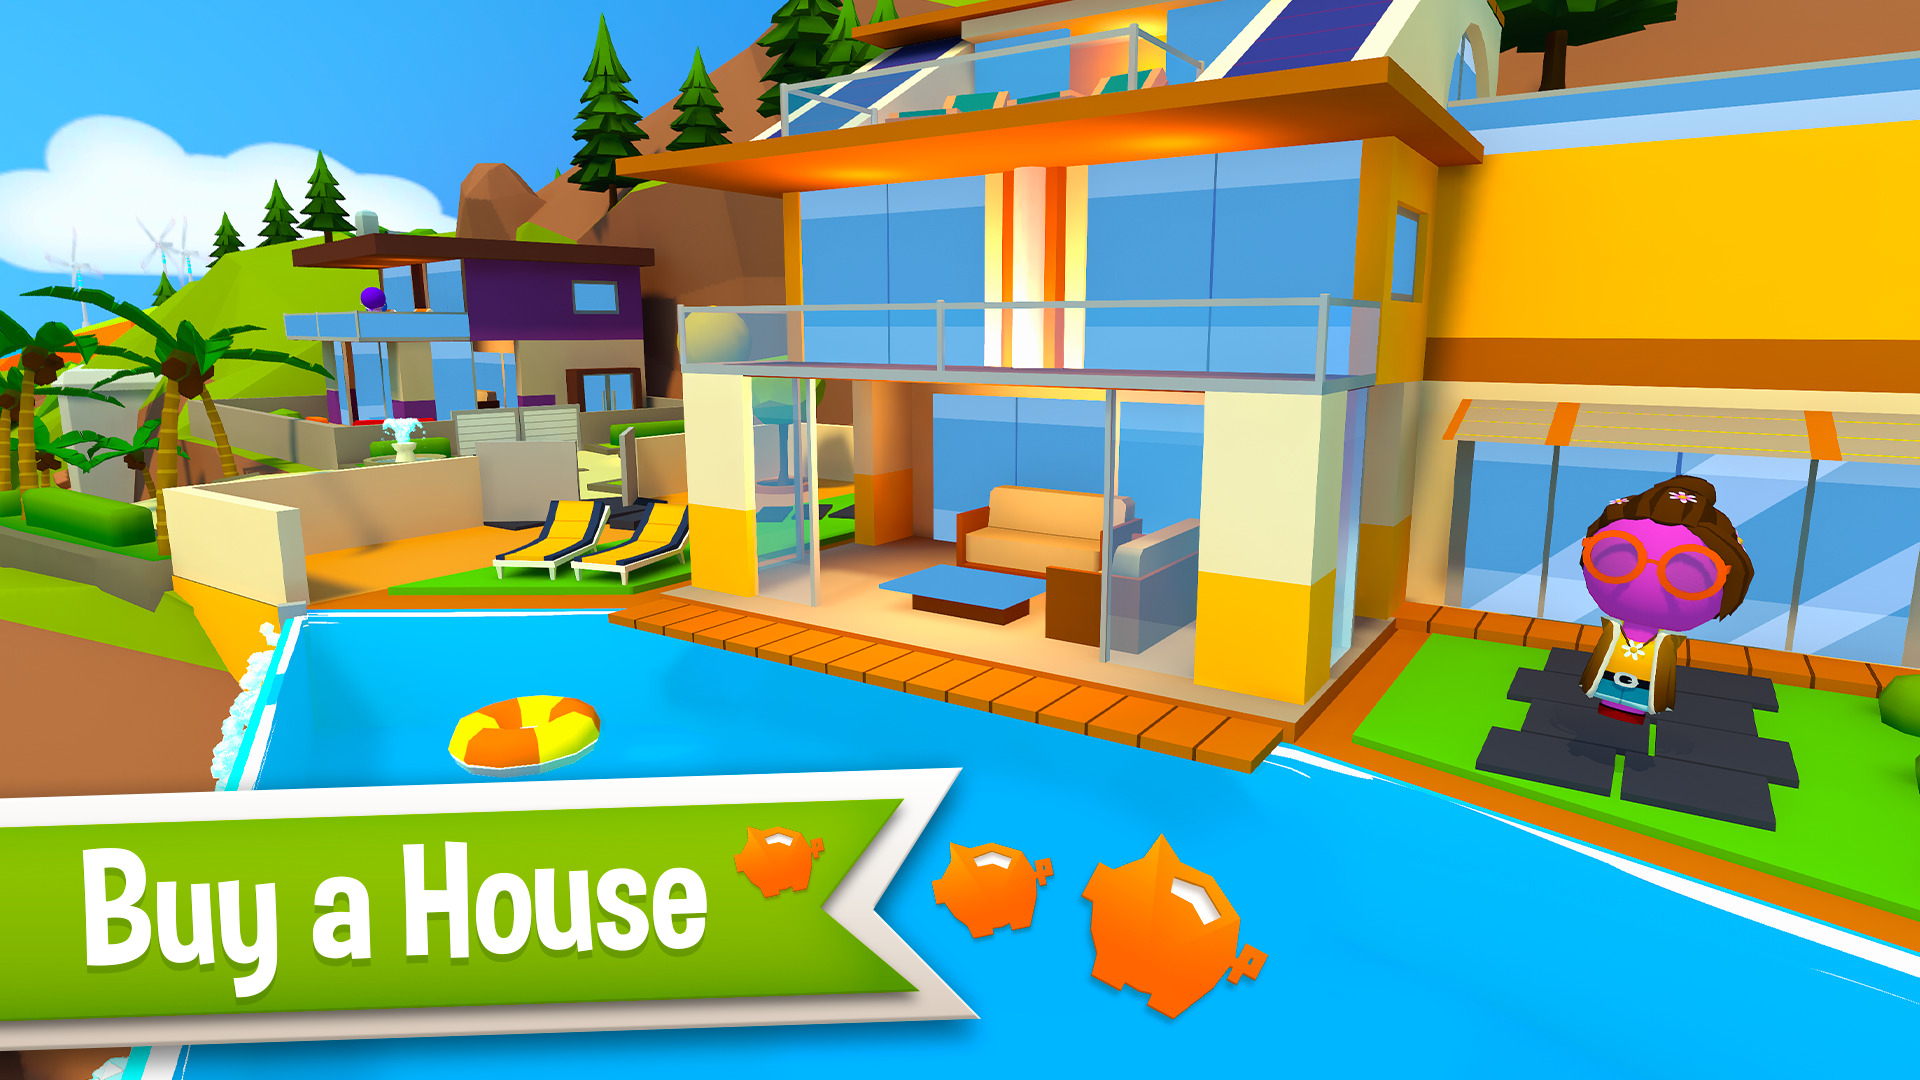 Android app deals of the day: The Game of Life 1 and 2, more